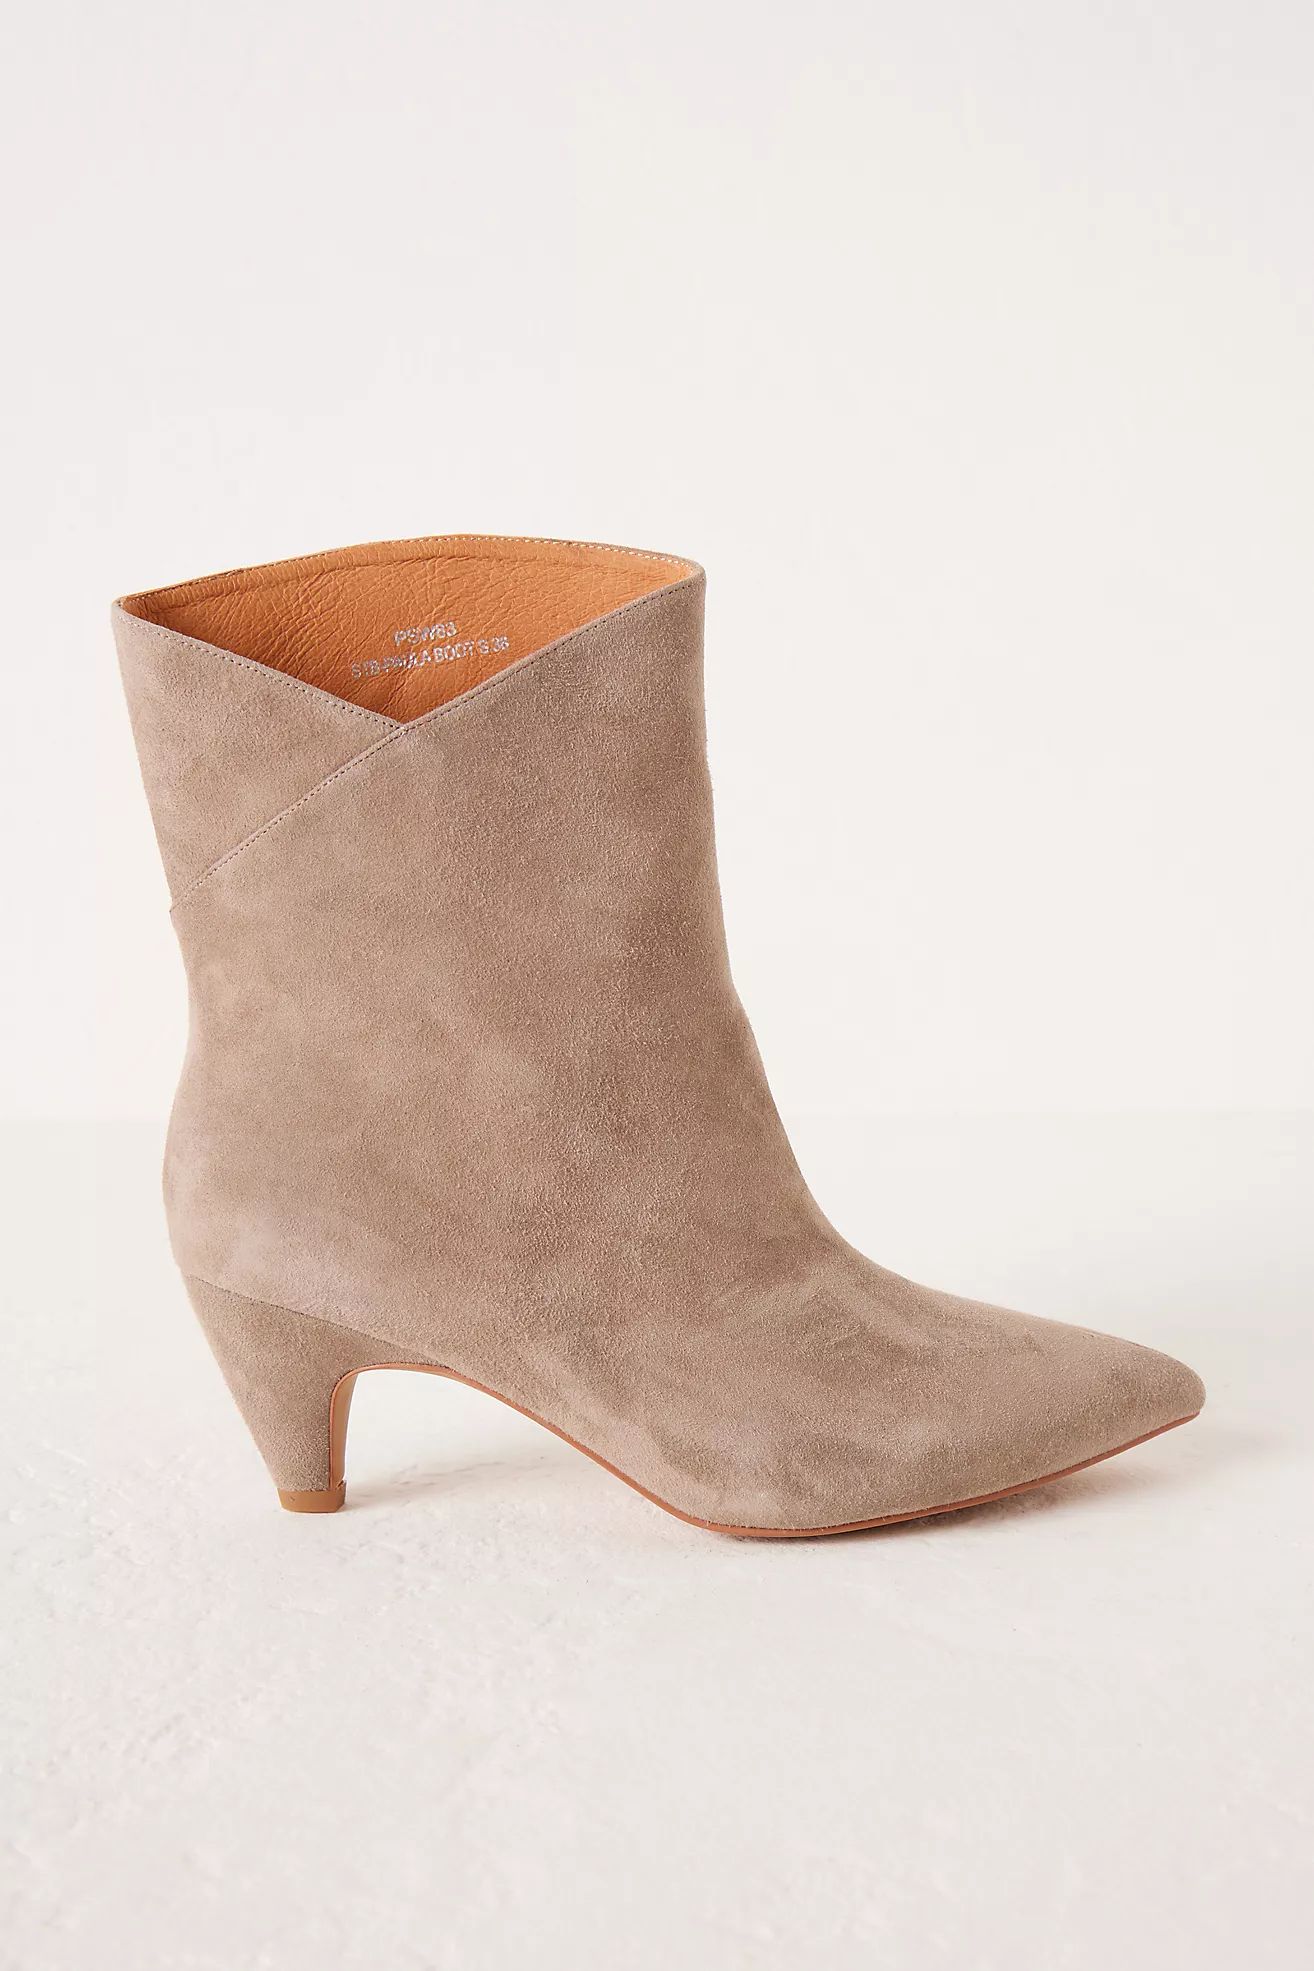 Shoe The Bear Paula Suede Point Ankle Boots | Anthropologie (UK)